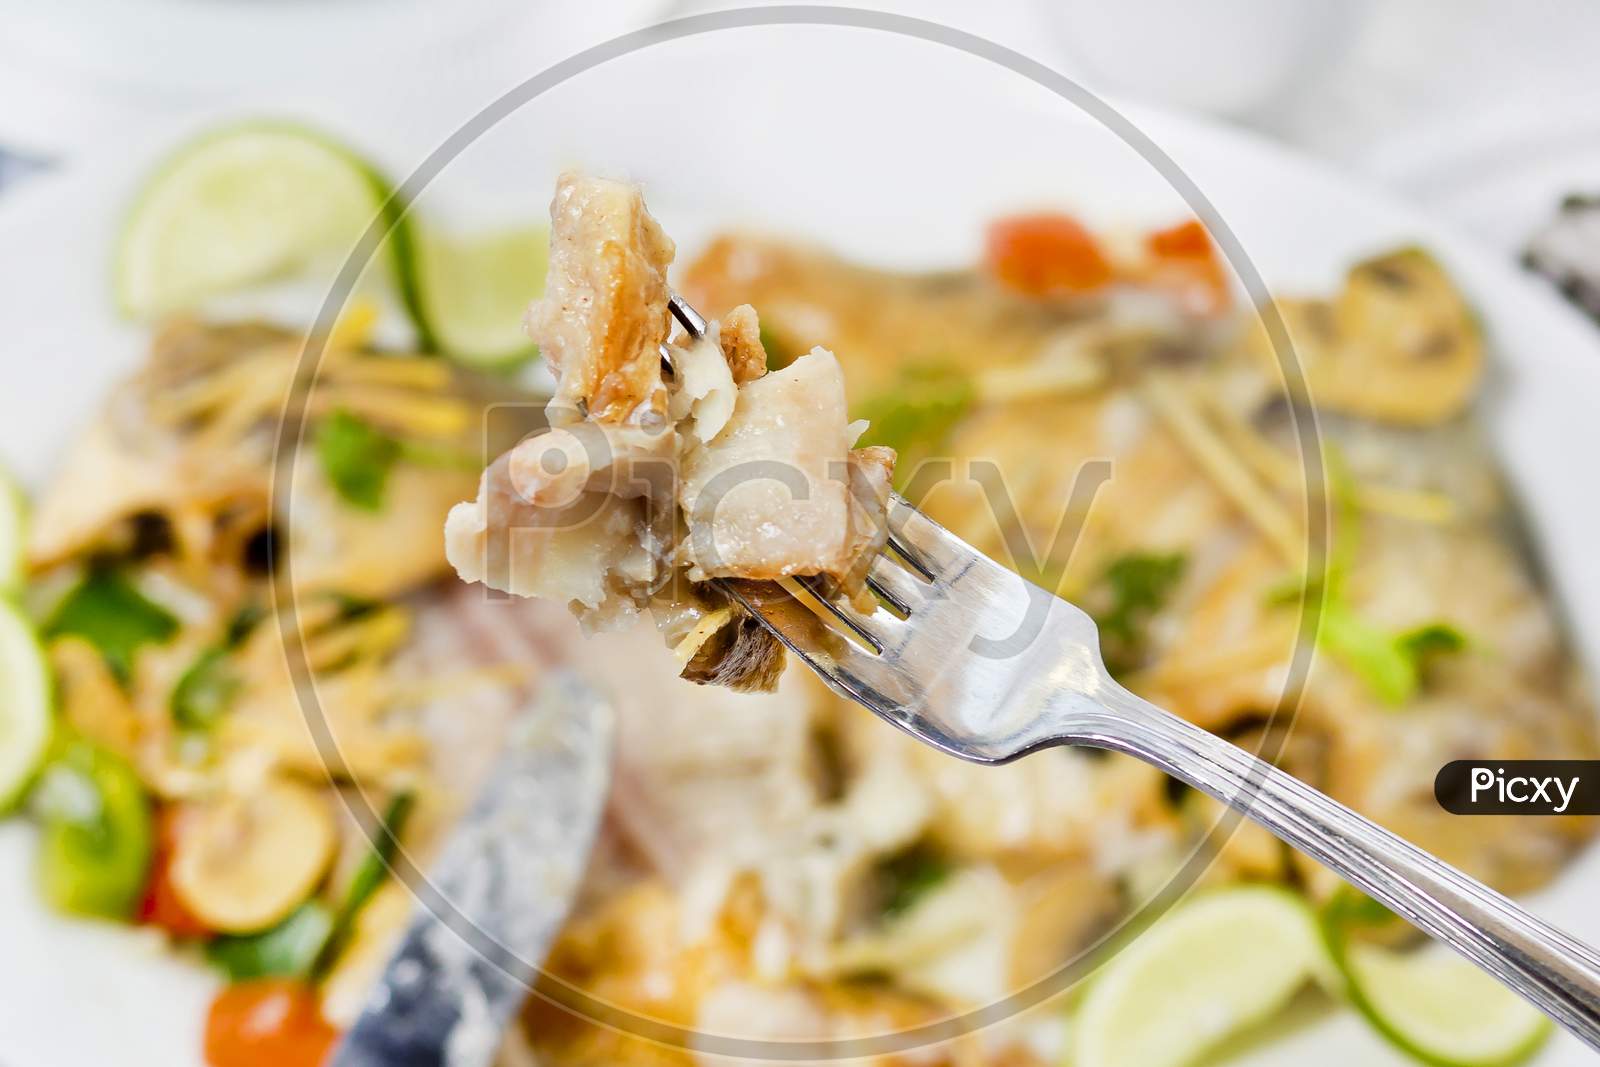 Pieces Of Pomfret Fish On A Fork Close-Up.